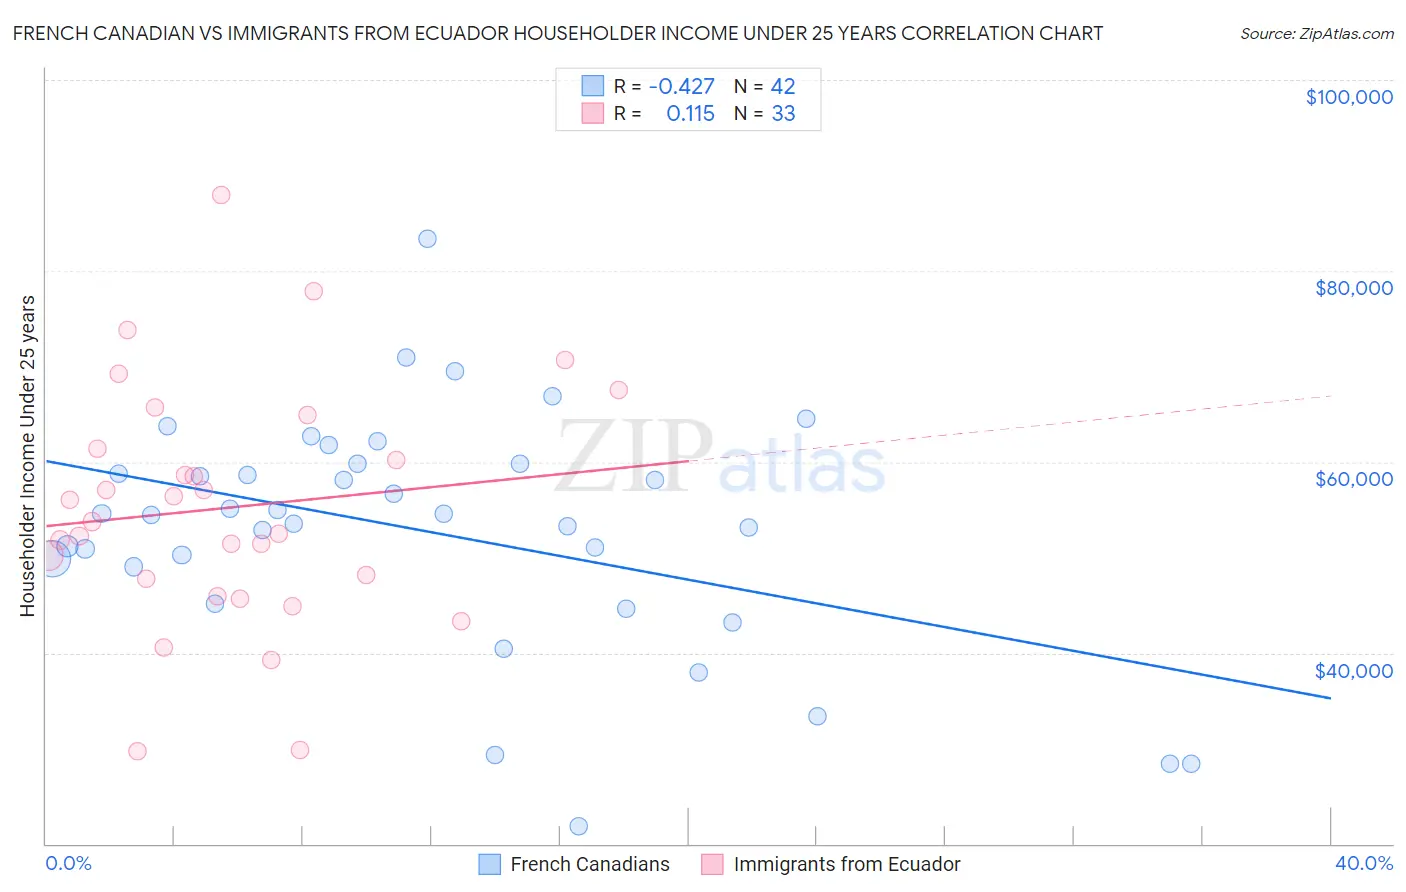 French Canadian vs Immigrants from Ecuador Householder Income Under 25 years